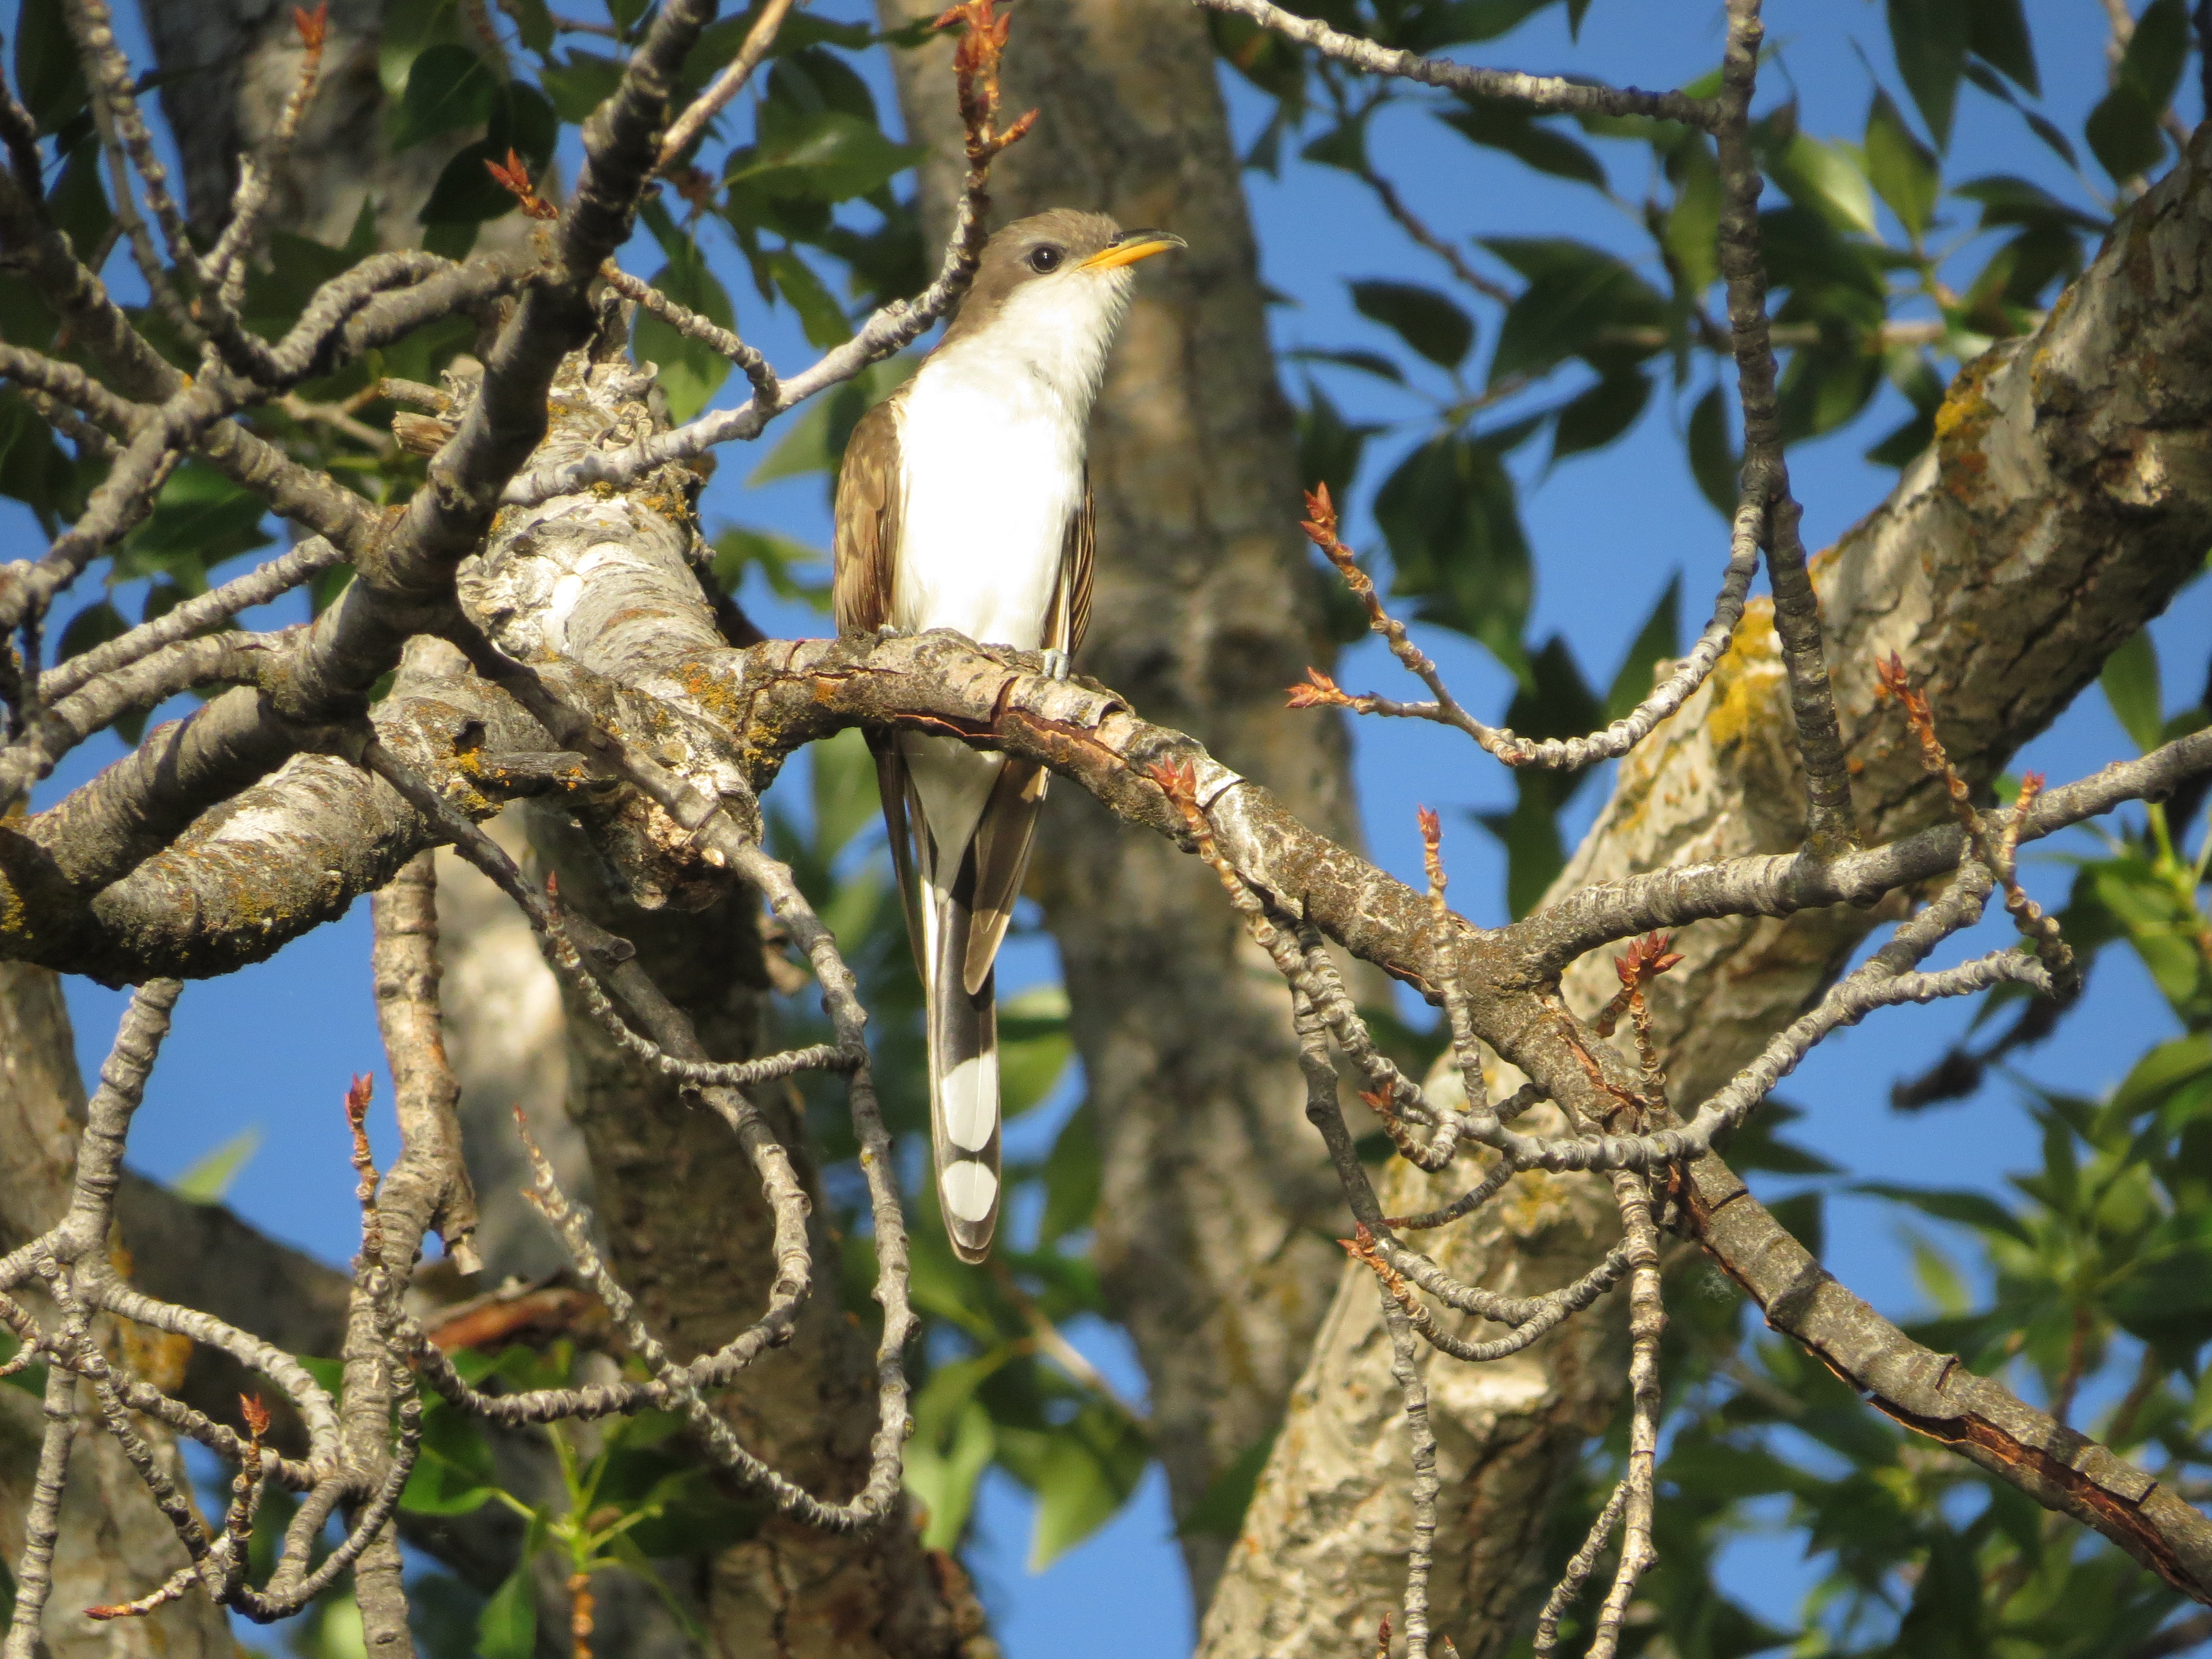 A yellow-billed cuckoo (a tan bird with yellow bill and white breast) sits alert, looking into the camera